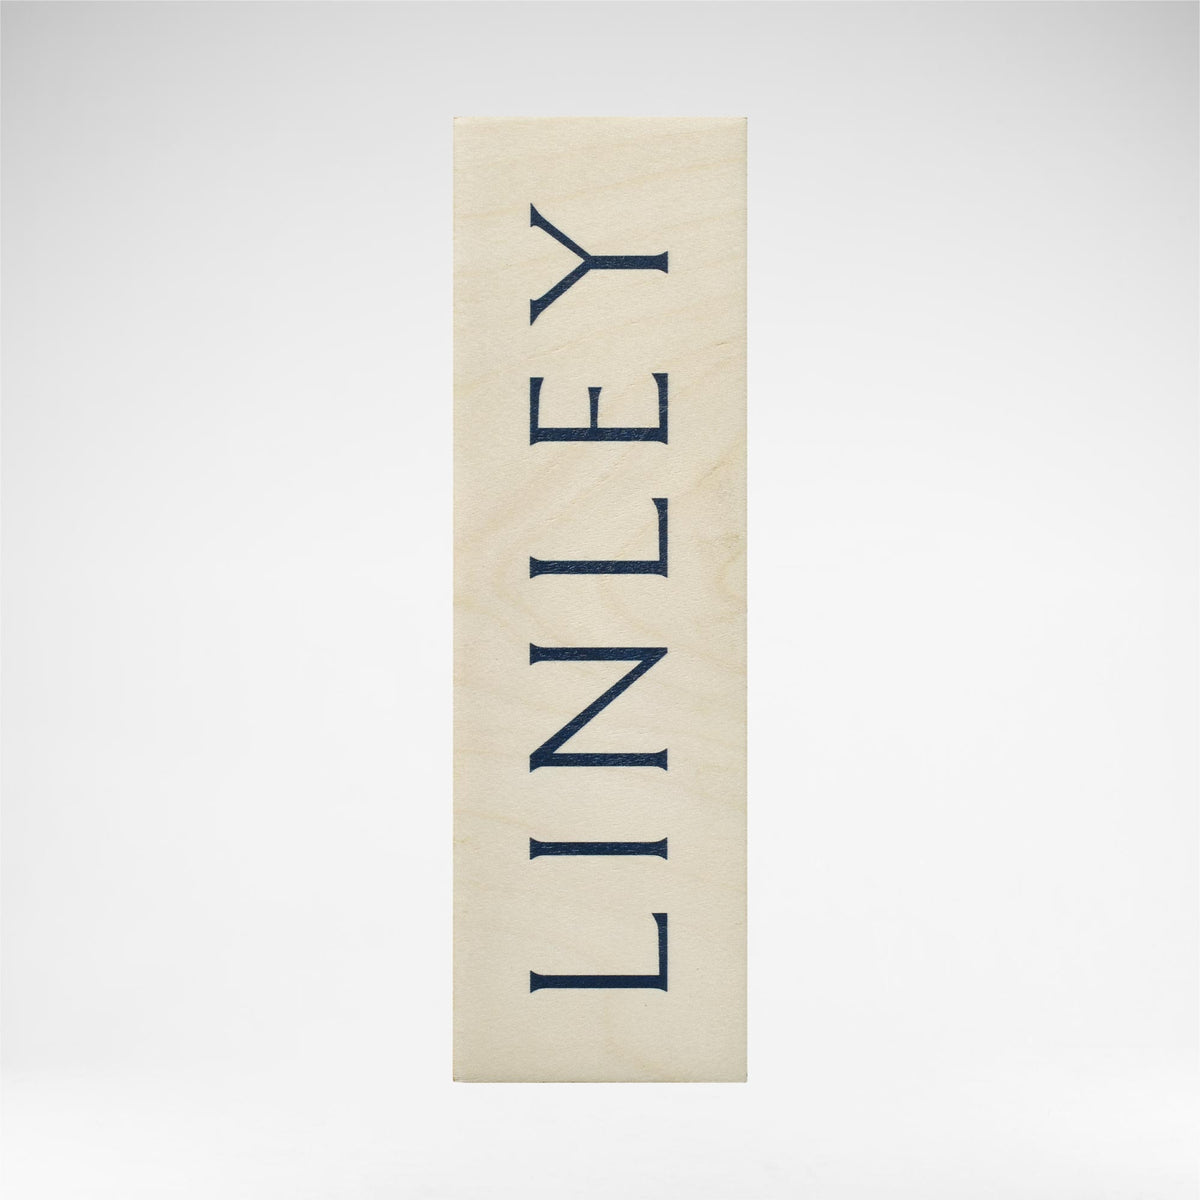 Zodiac Bookmark - Leo | Luxury Home Accessories & Gifts | LINLEY